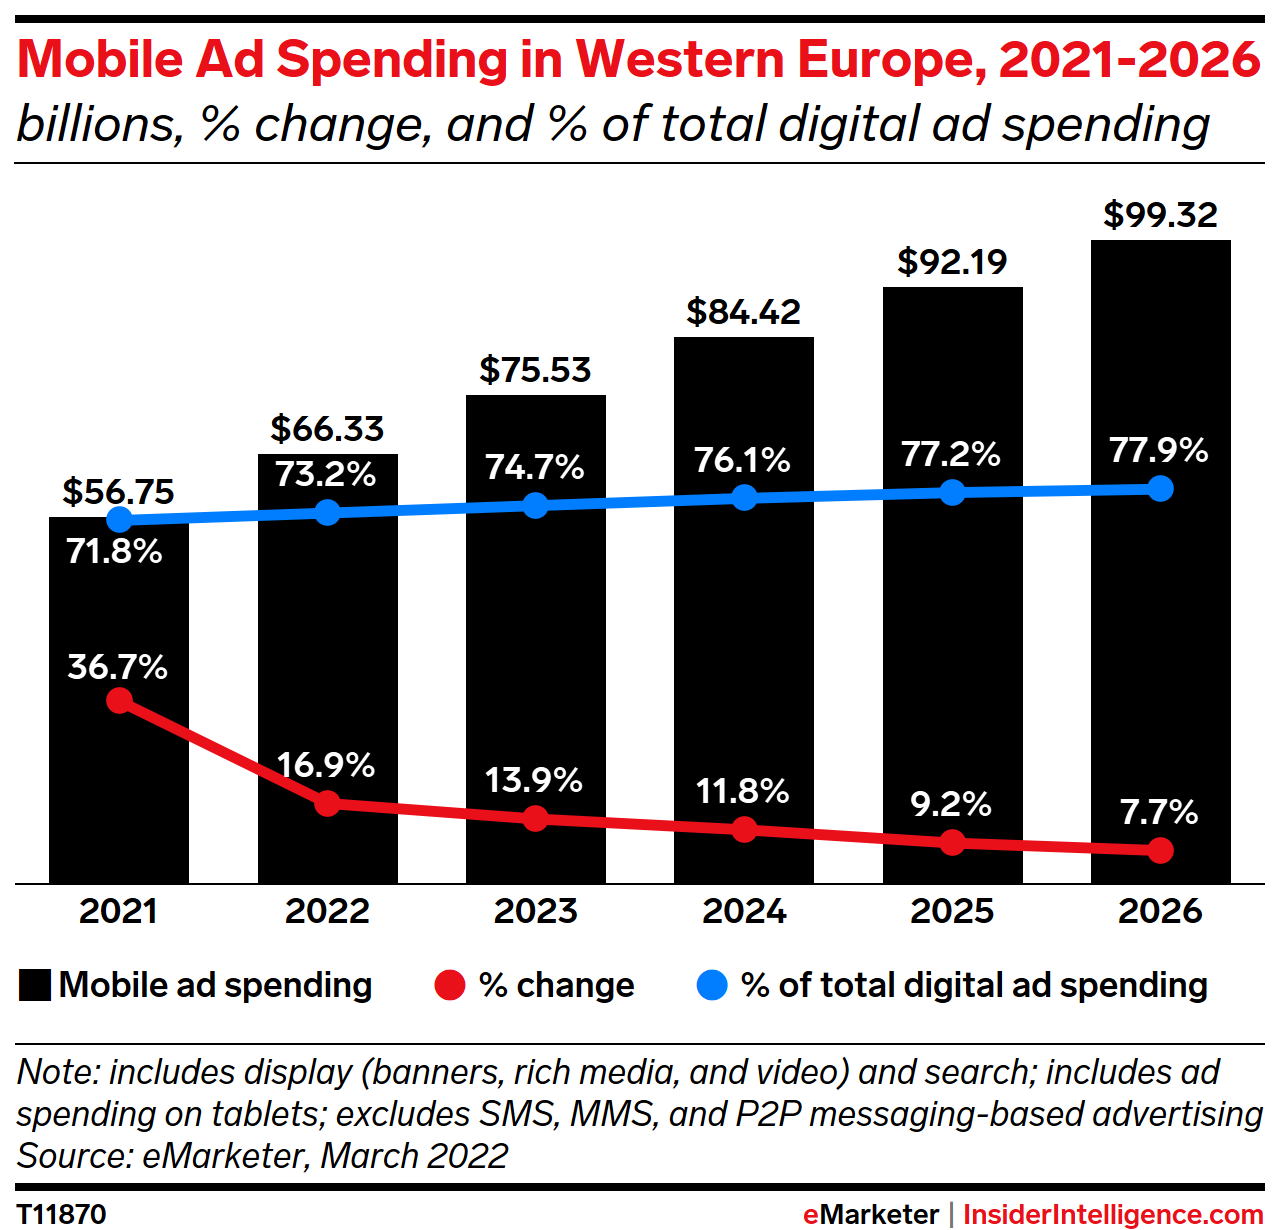 Mobile Ad Spending in Western Europe, 2021-2026 (billions, % change, and % of total media ad spending)